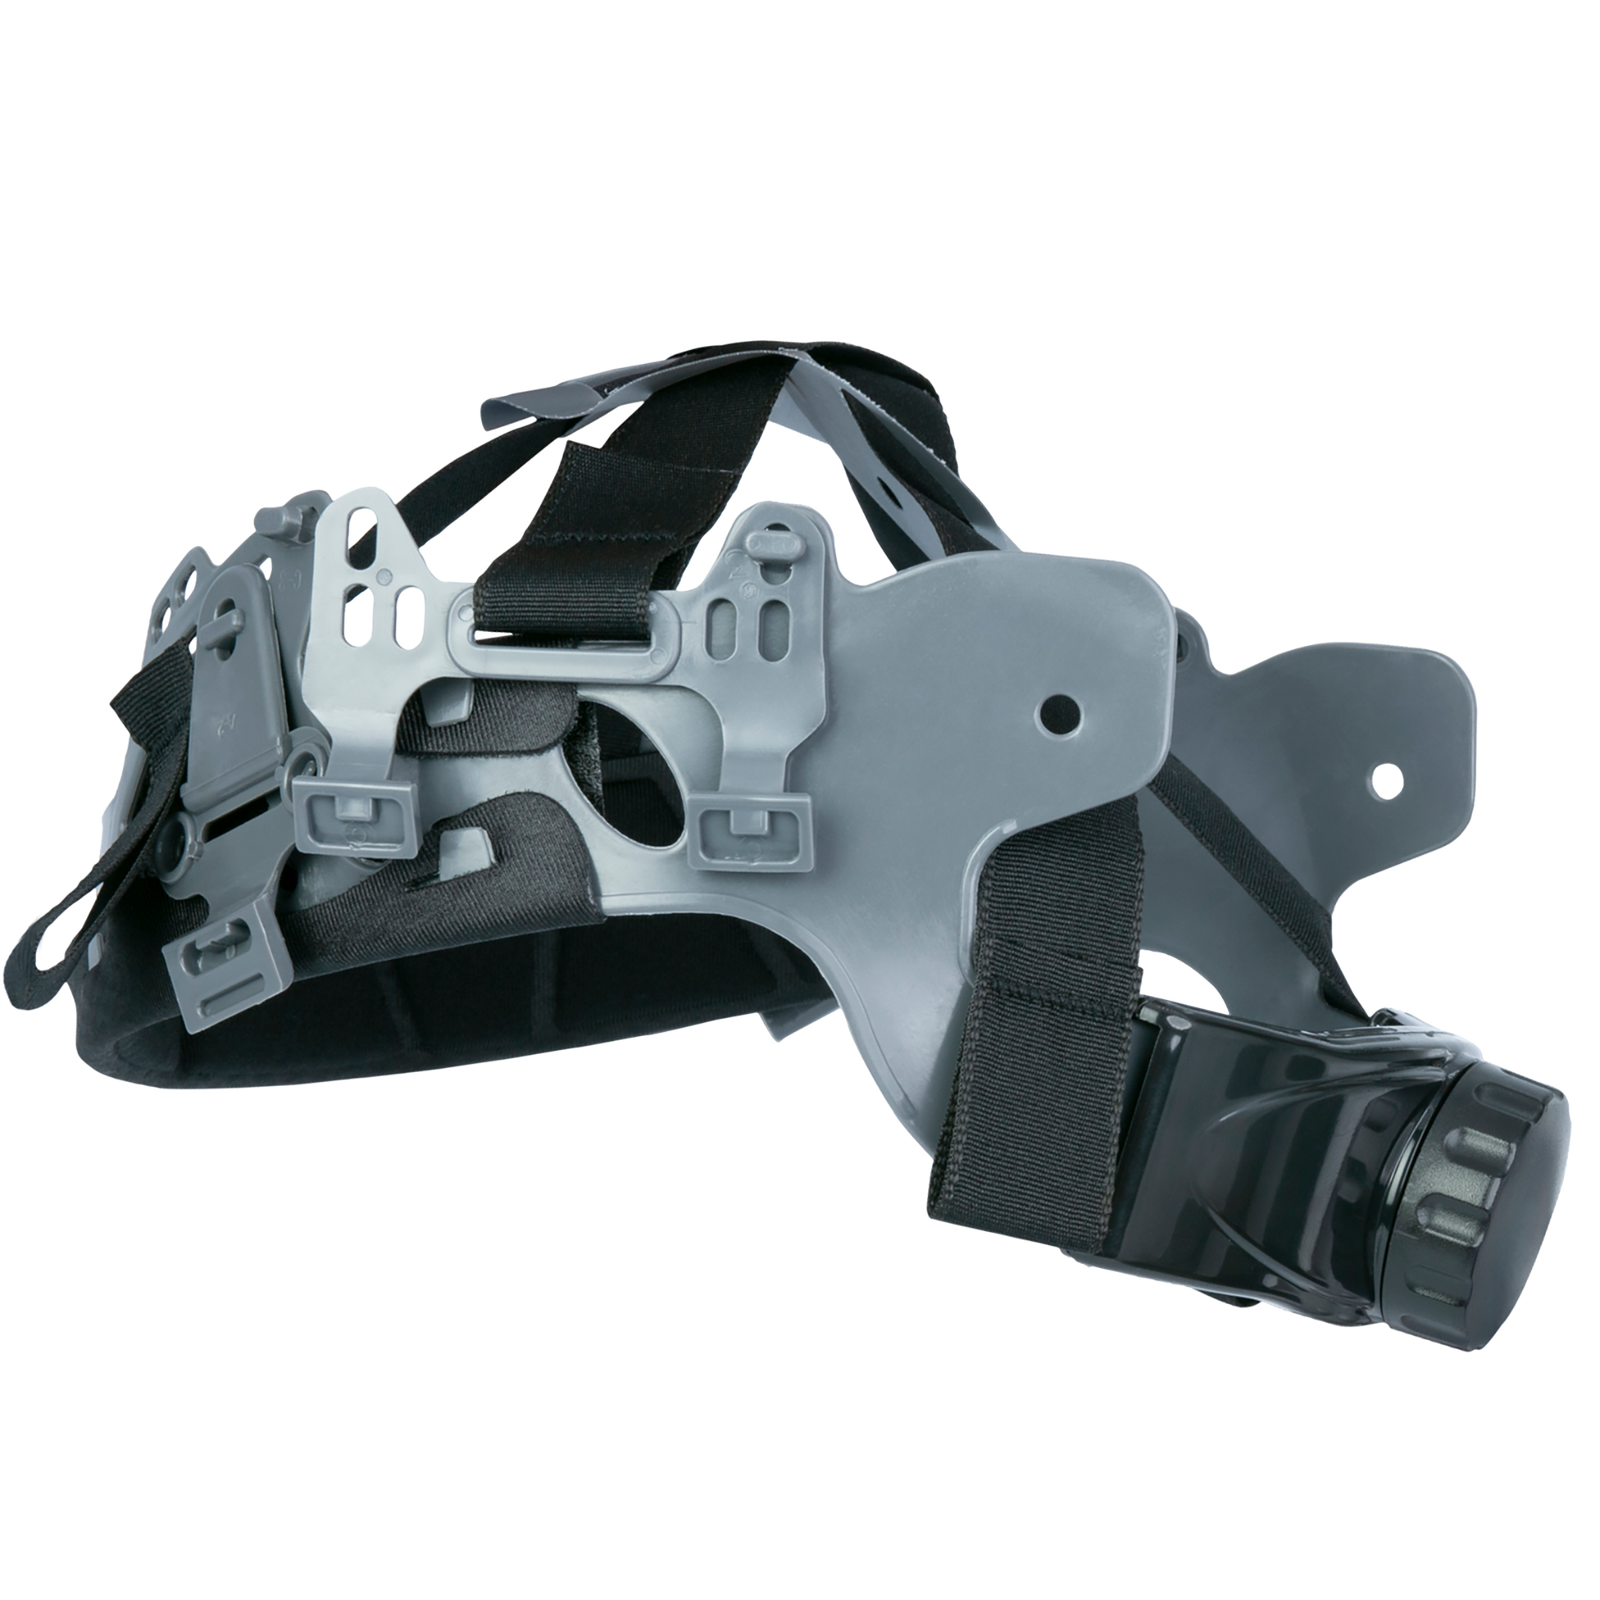 Side view of the gray and black 6 point ratchet suspension replacement system for JORESTECH hard hat 03